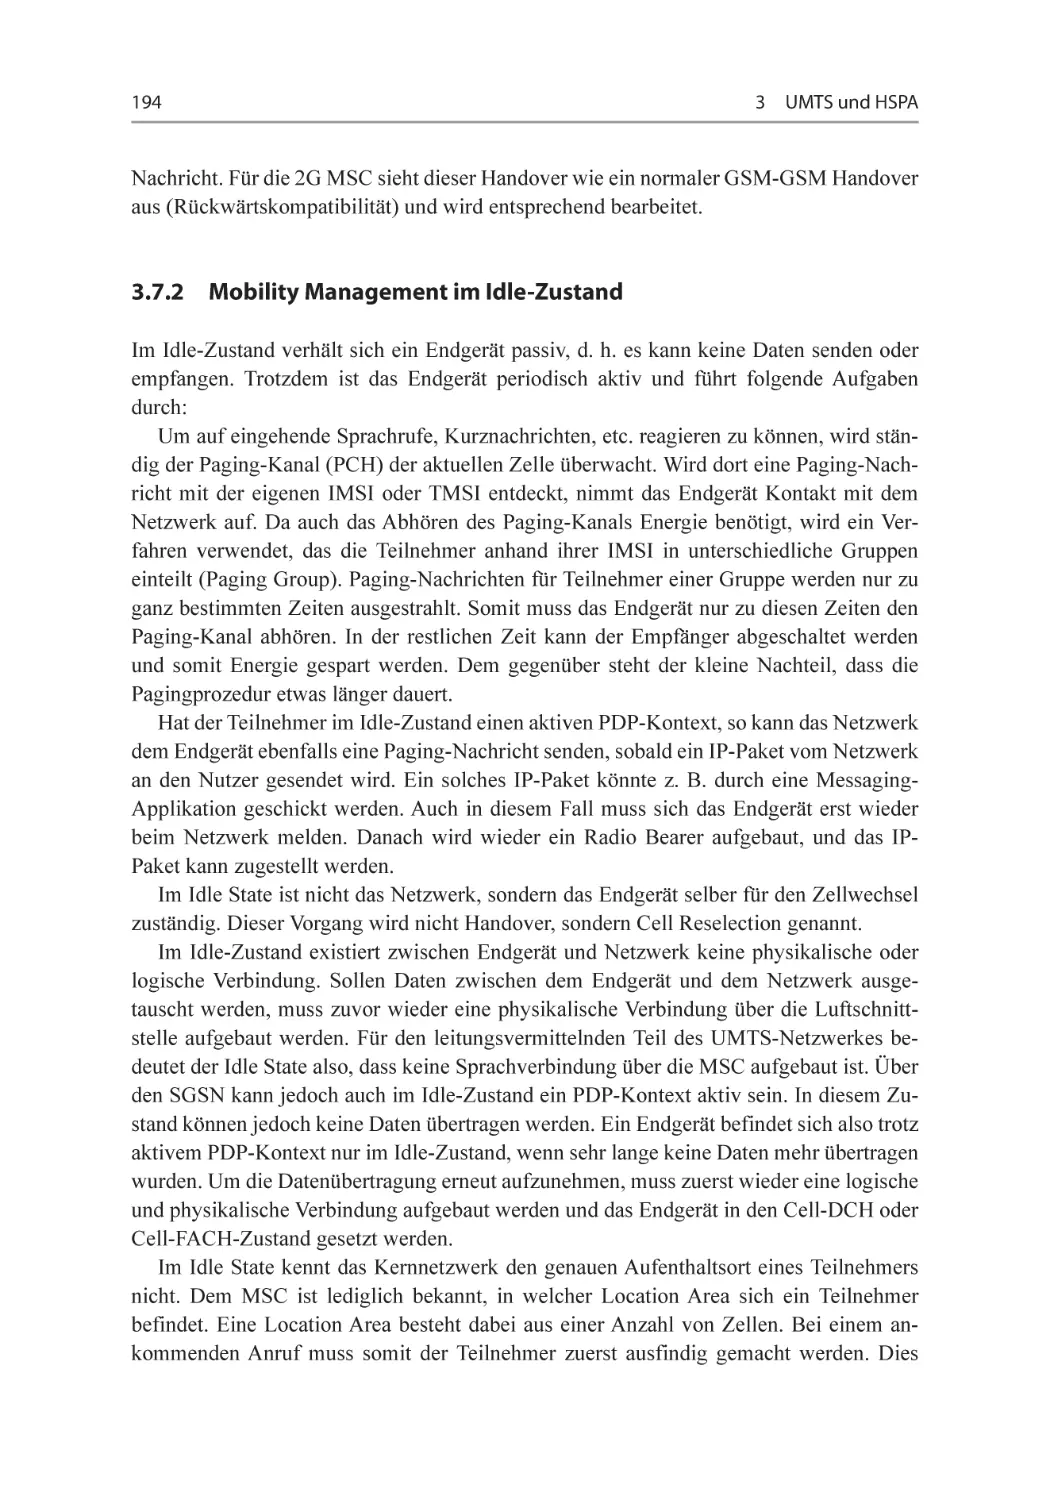 3.7.2 Mobility Management im Idle-Zustand